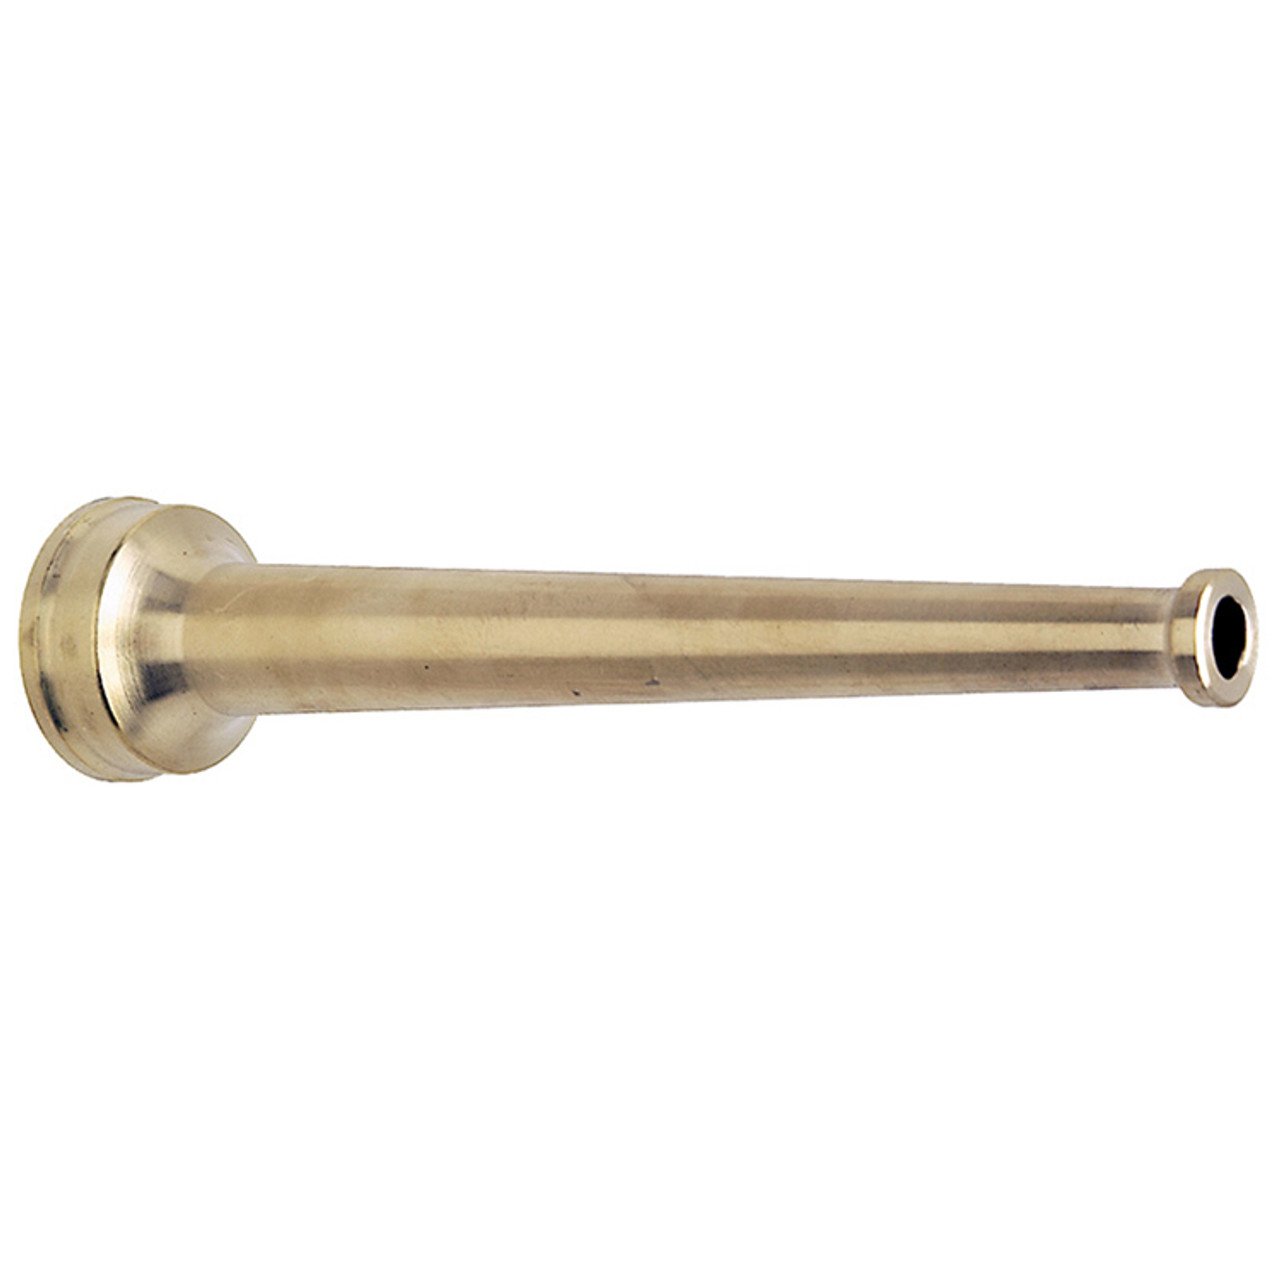 2" NPSH Solid Brass Tapered Nozzle  G37-200